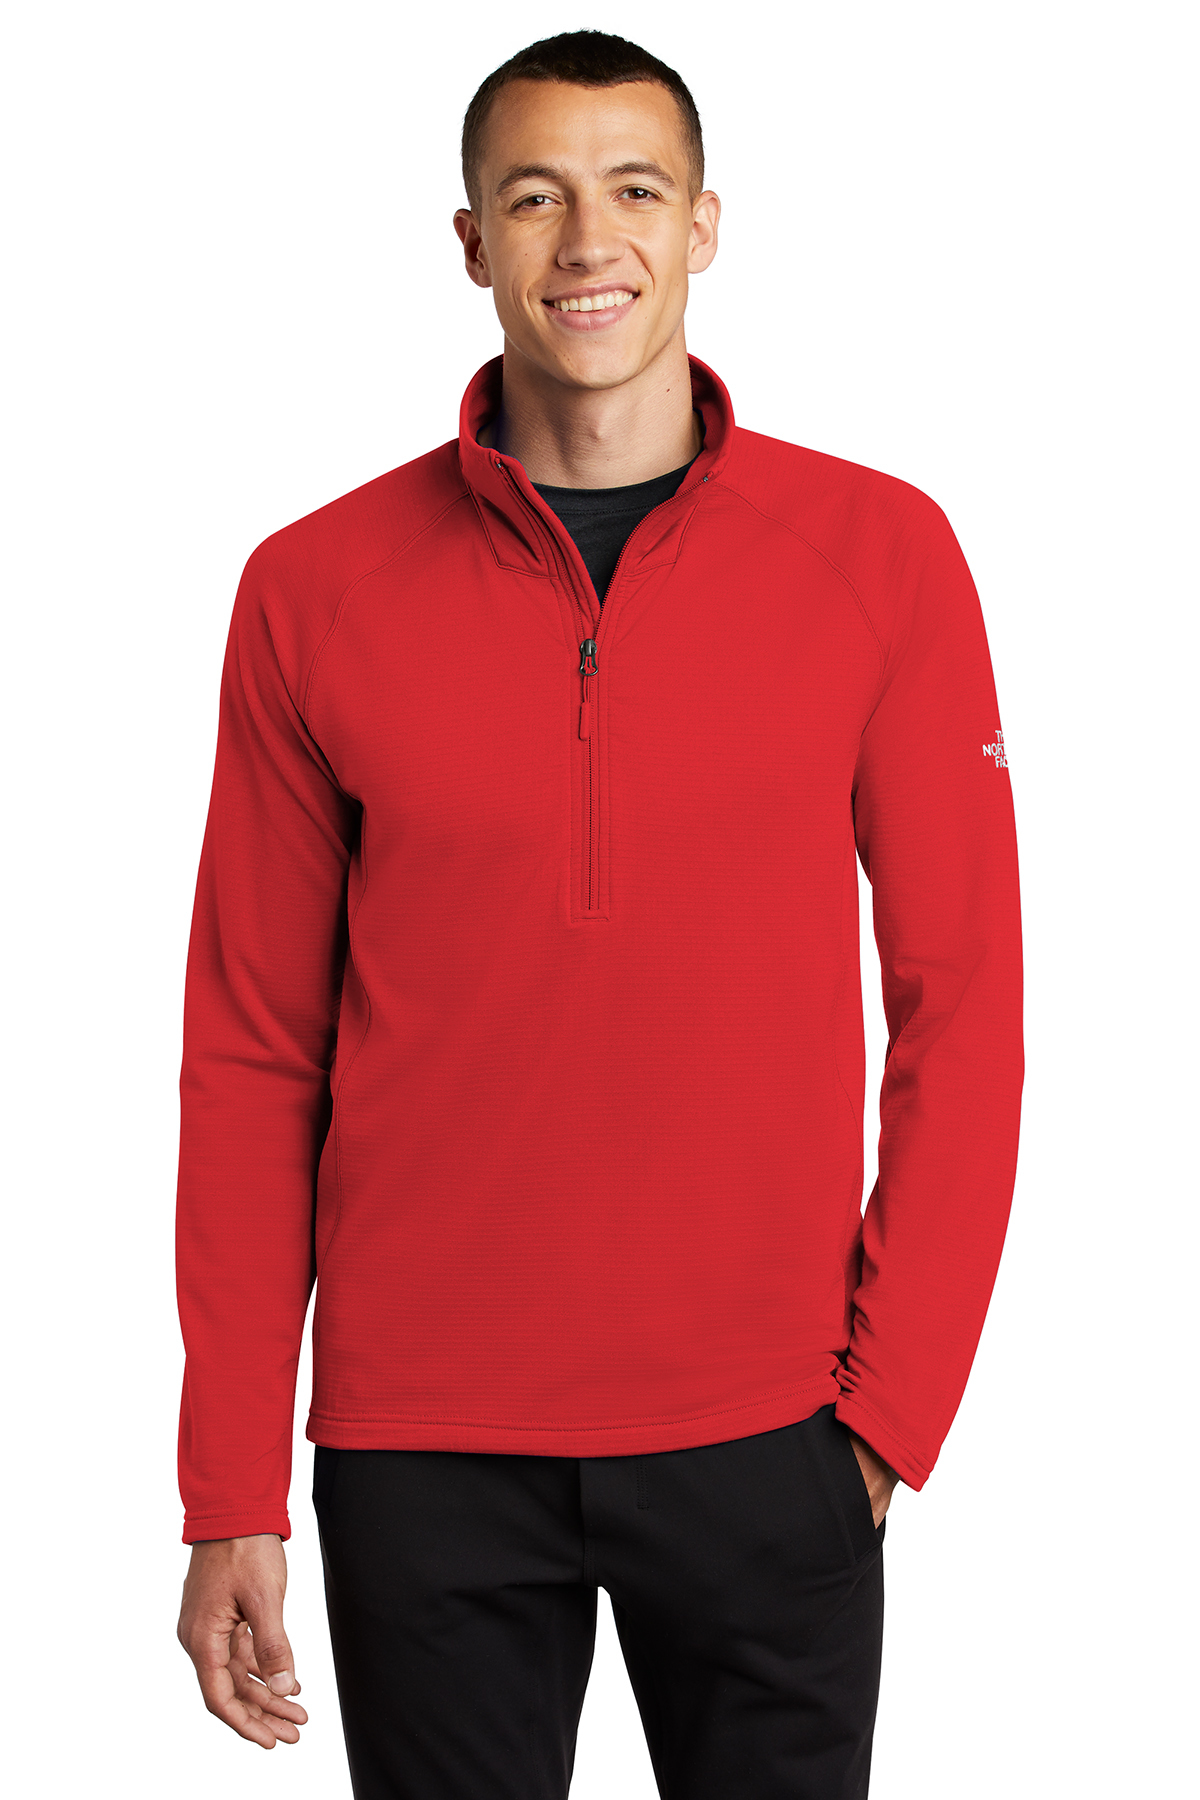 The North Face Mountain Peaks 1/4-Zip Fleece | Product | Company 